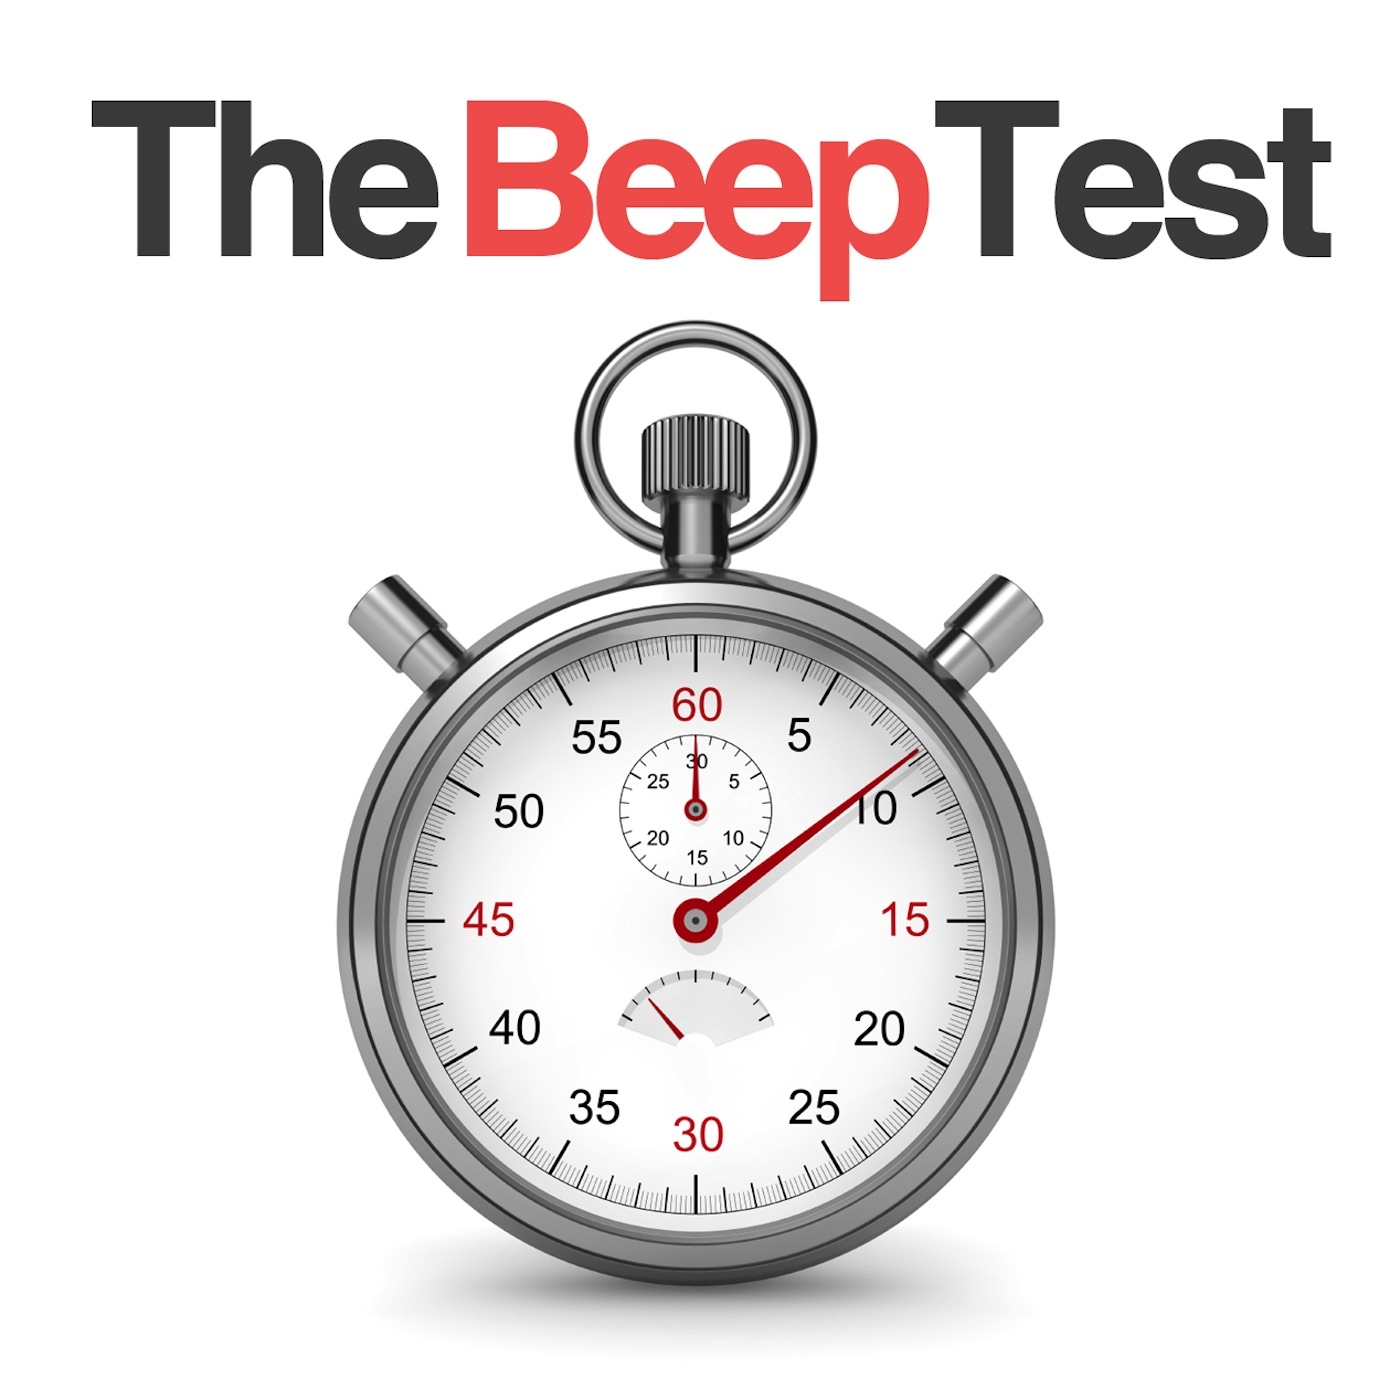 The Beep Test: Instructions for the 20m Test